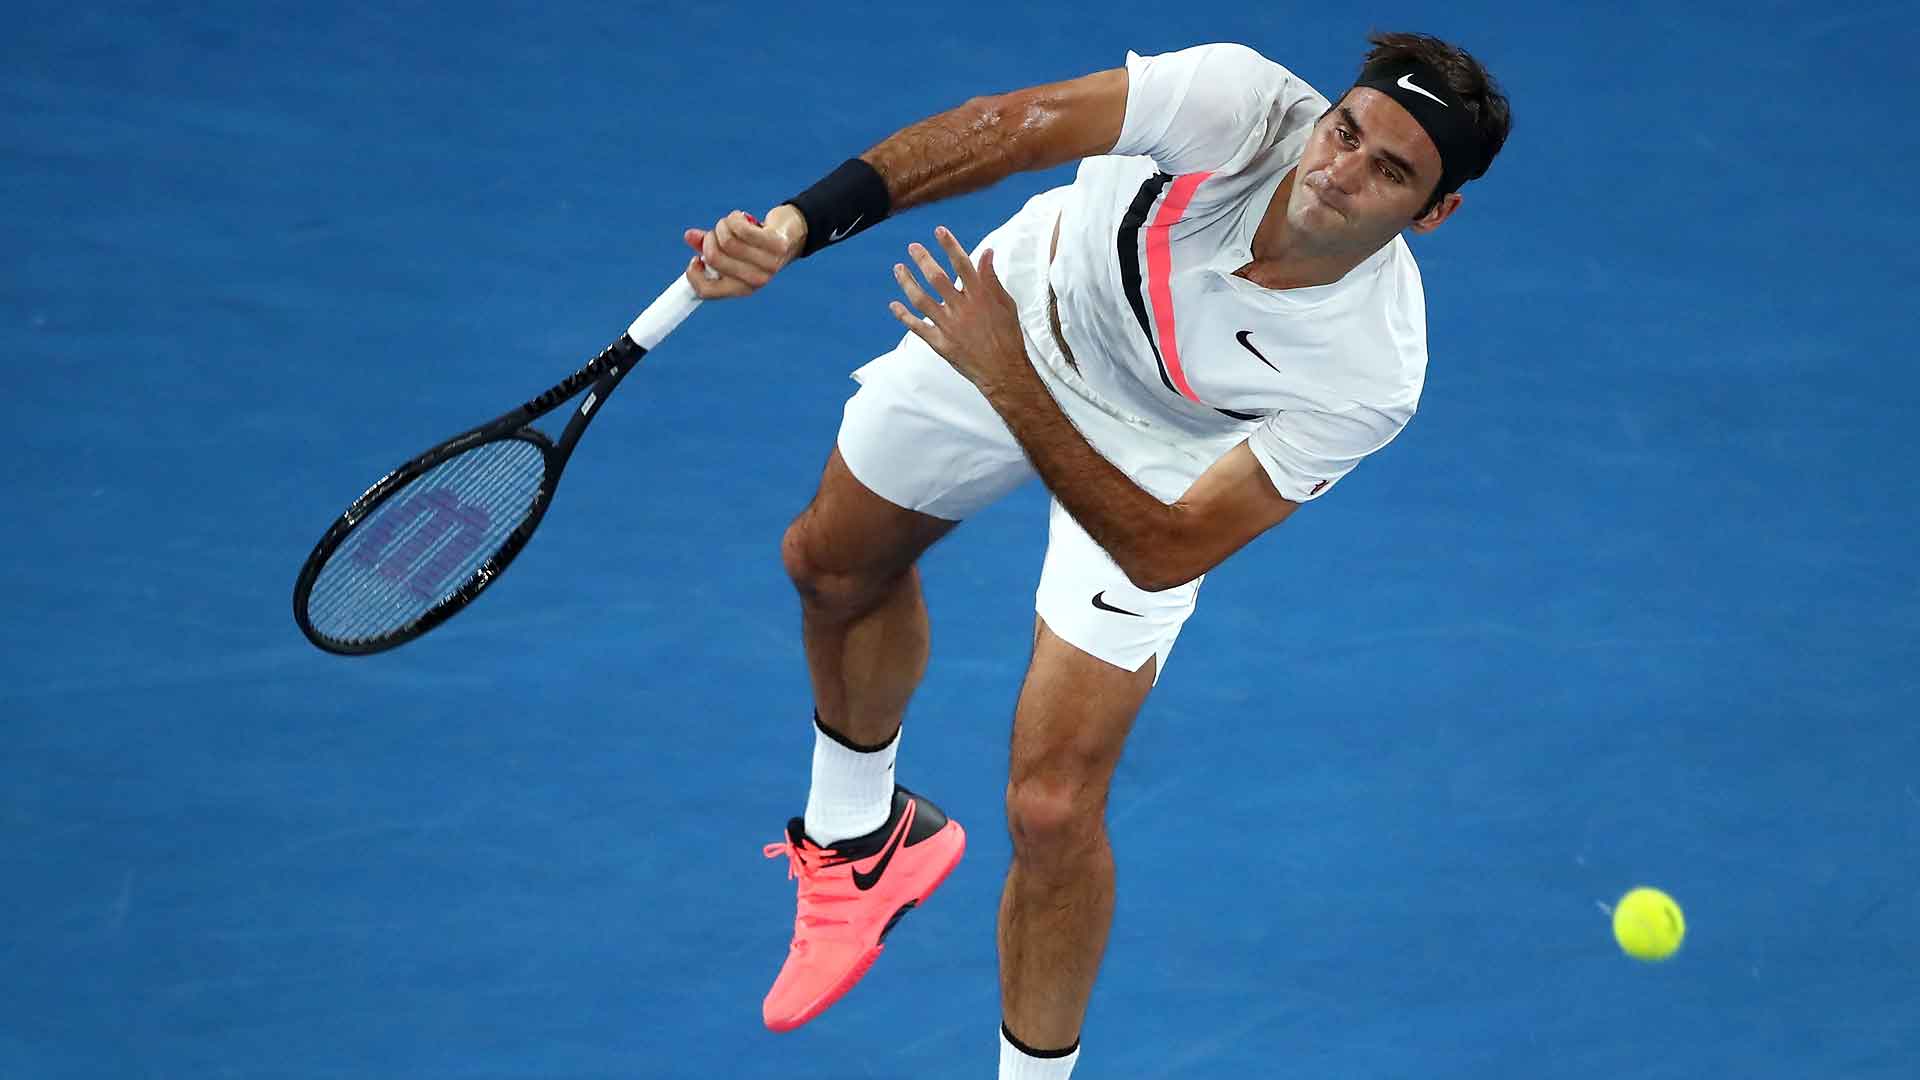 Roger Federer hit 24 winners, including nine aces, in the injury curtailed semi-final against Hyeon Chung on Friday night at the Australian Open.